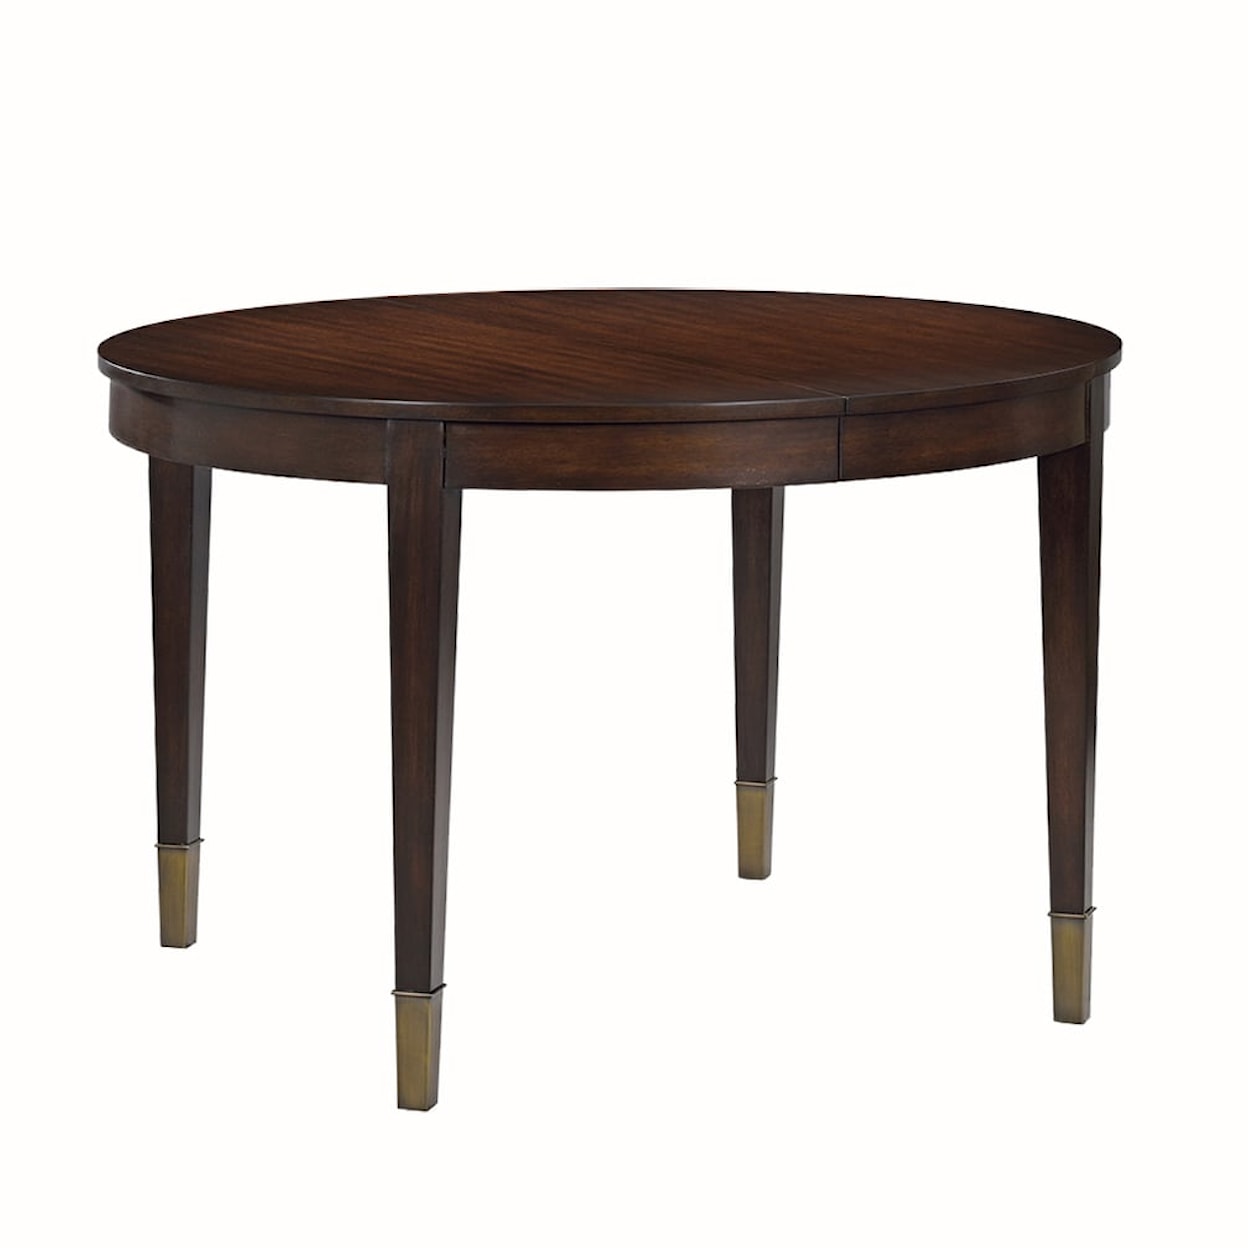 Oliver Home Furnishings Dining Tables ROUND DINING TABLE W/ LEAF- SYRUP